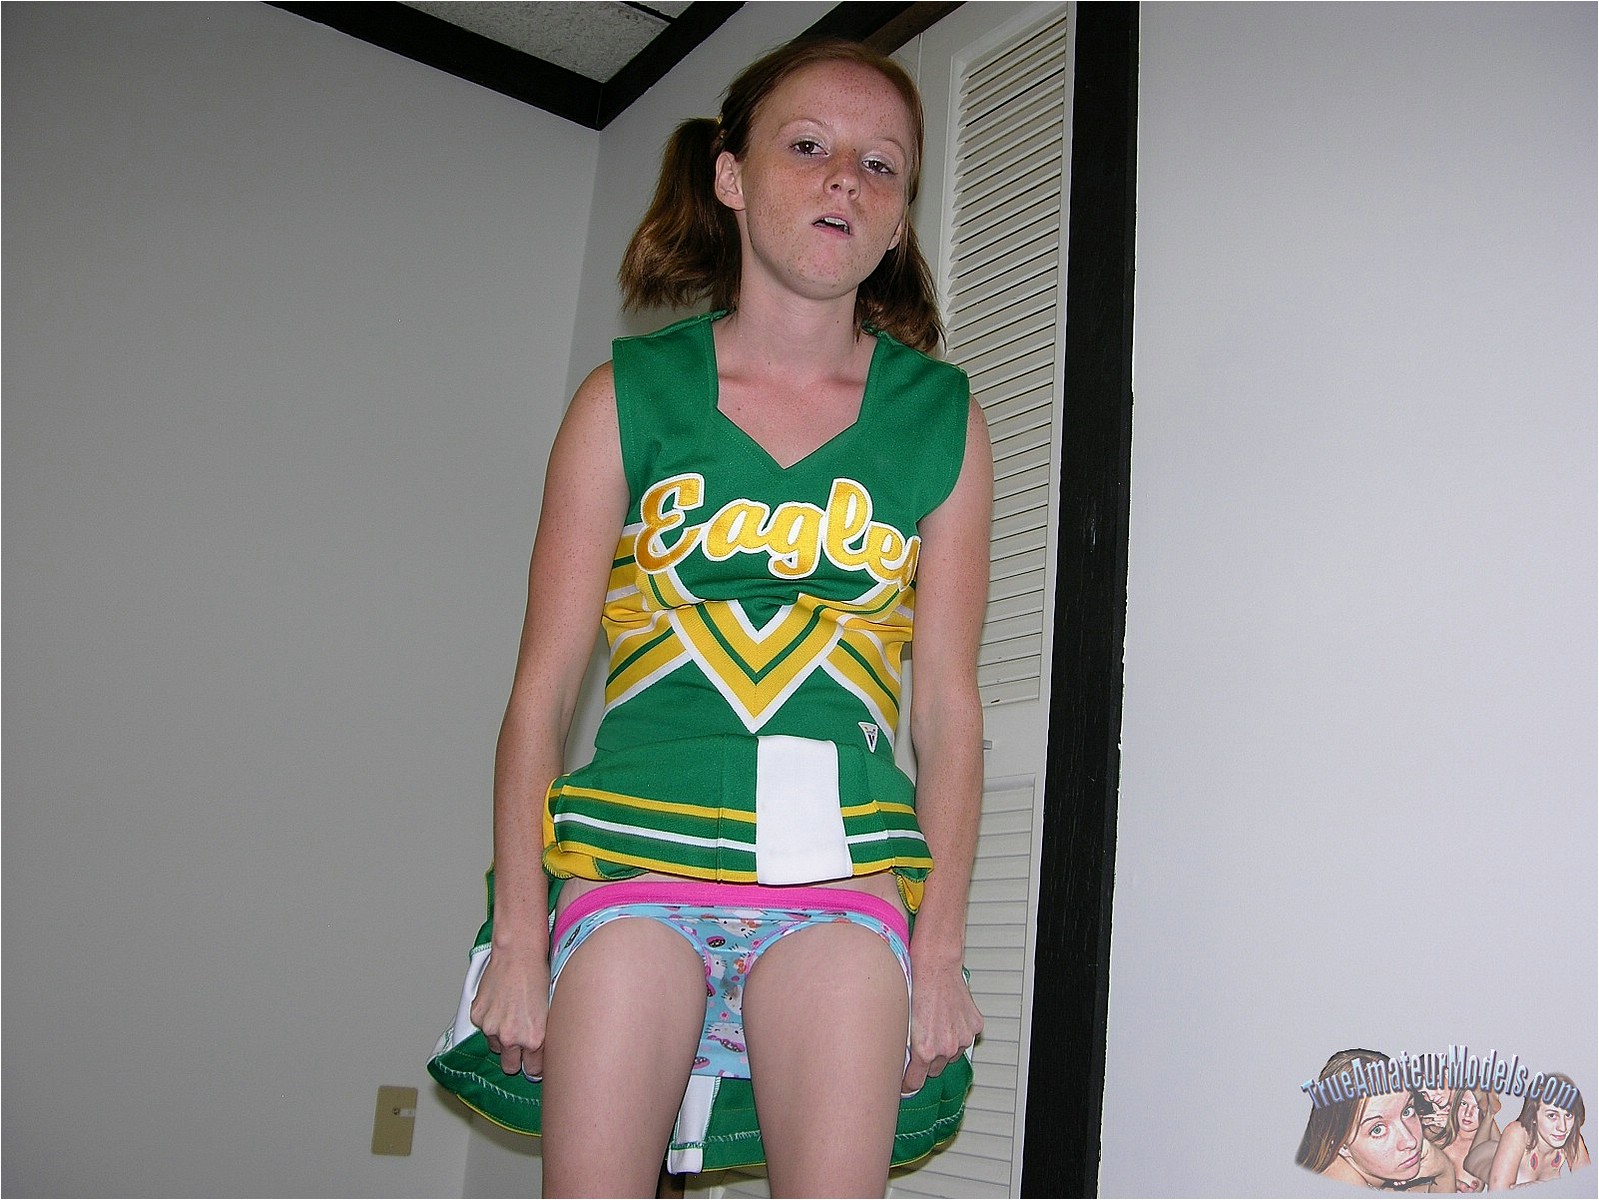 Barely Legal Cheerleader Tits - Nude Cheerleader Teen Alissa C. Modeling & Showing Her Tight Pussy